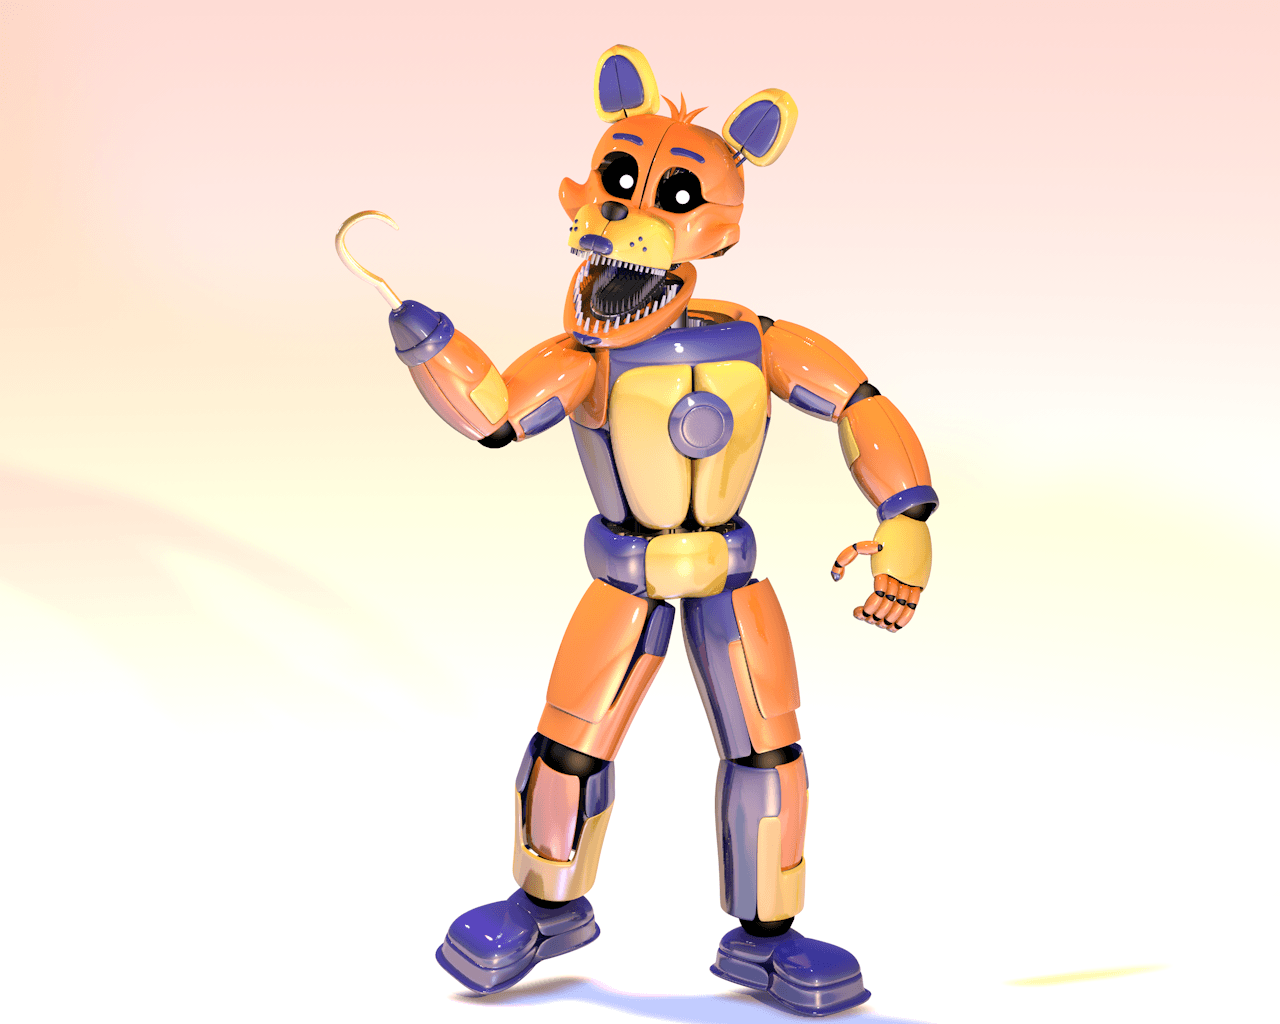 Party World Lolbit and Foxy! Characters By FreddleFrooby. Models